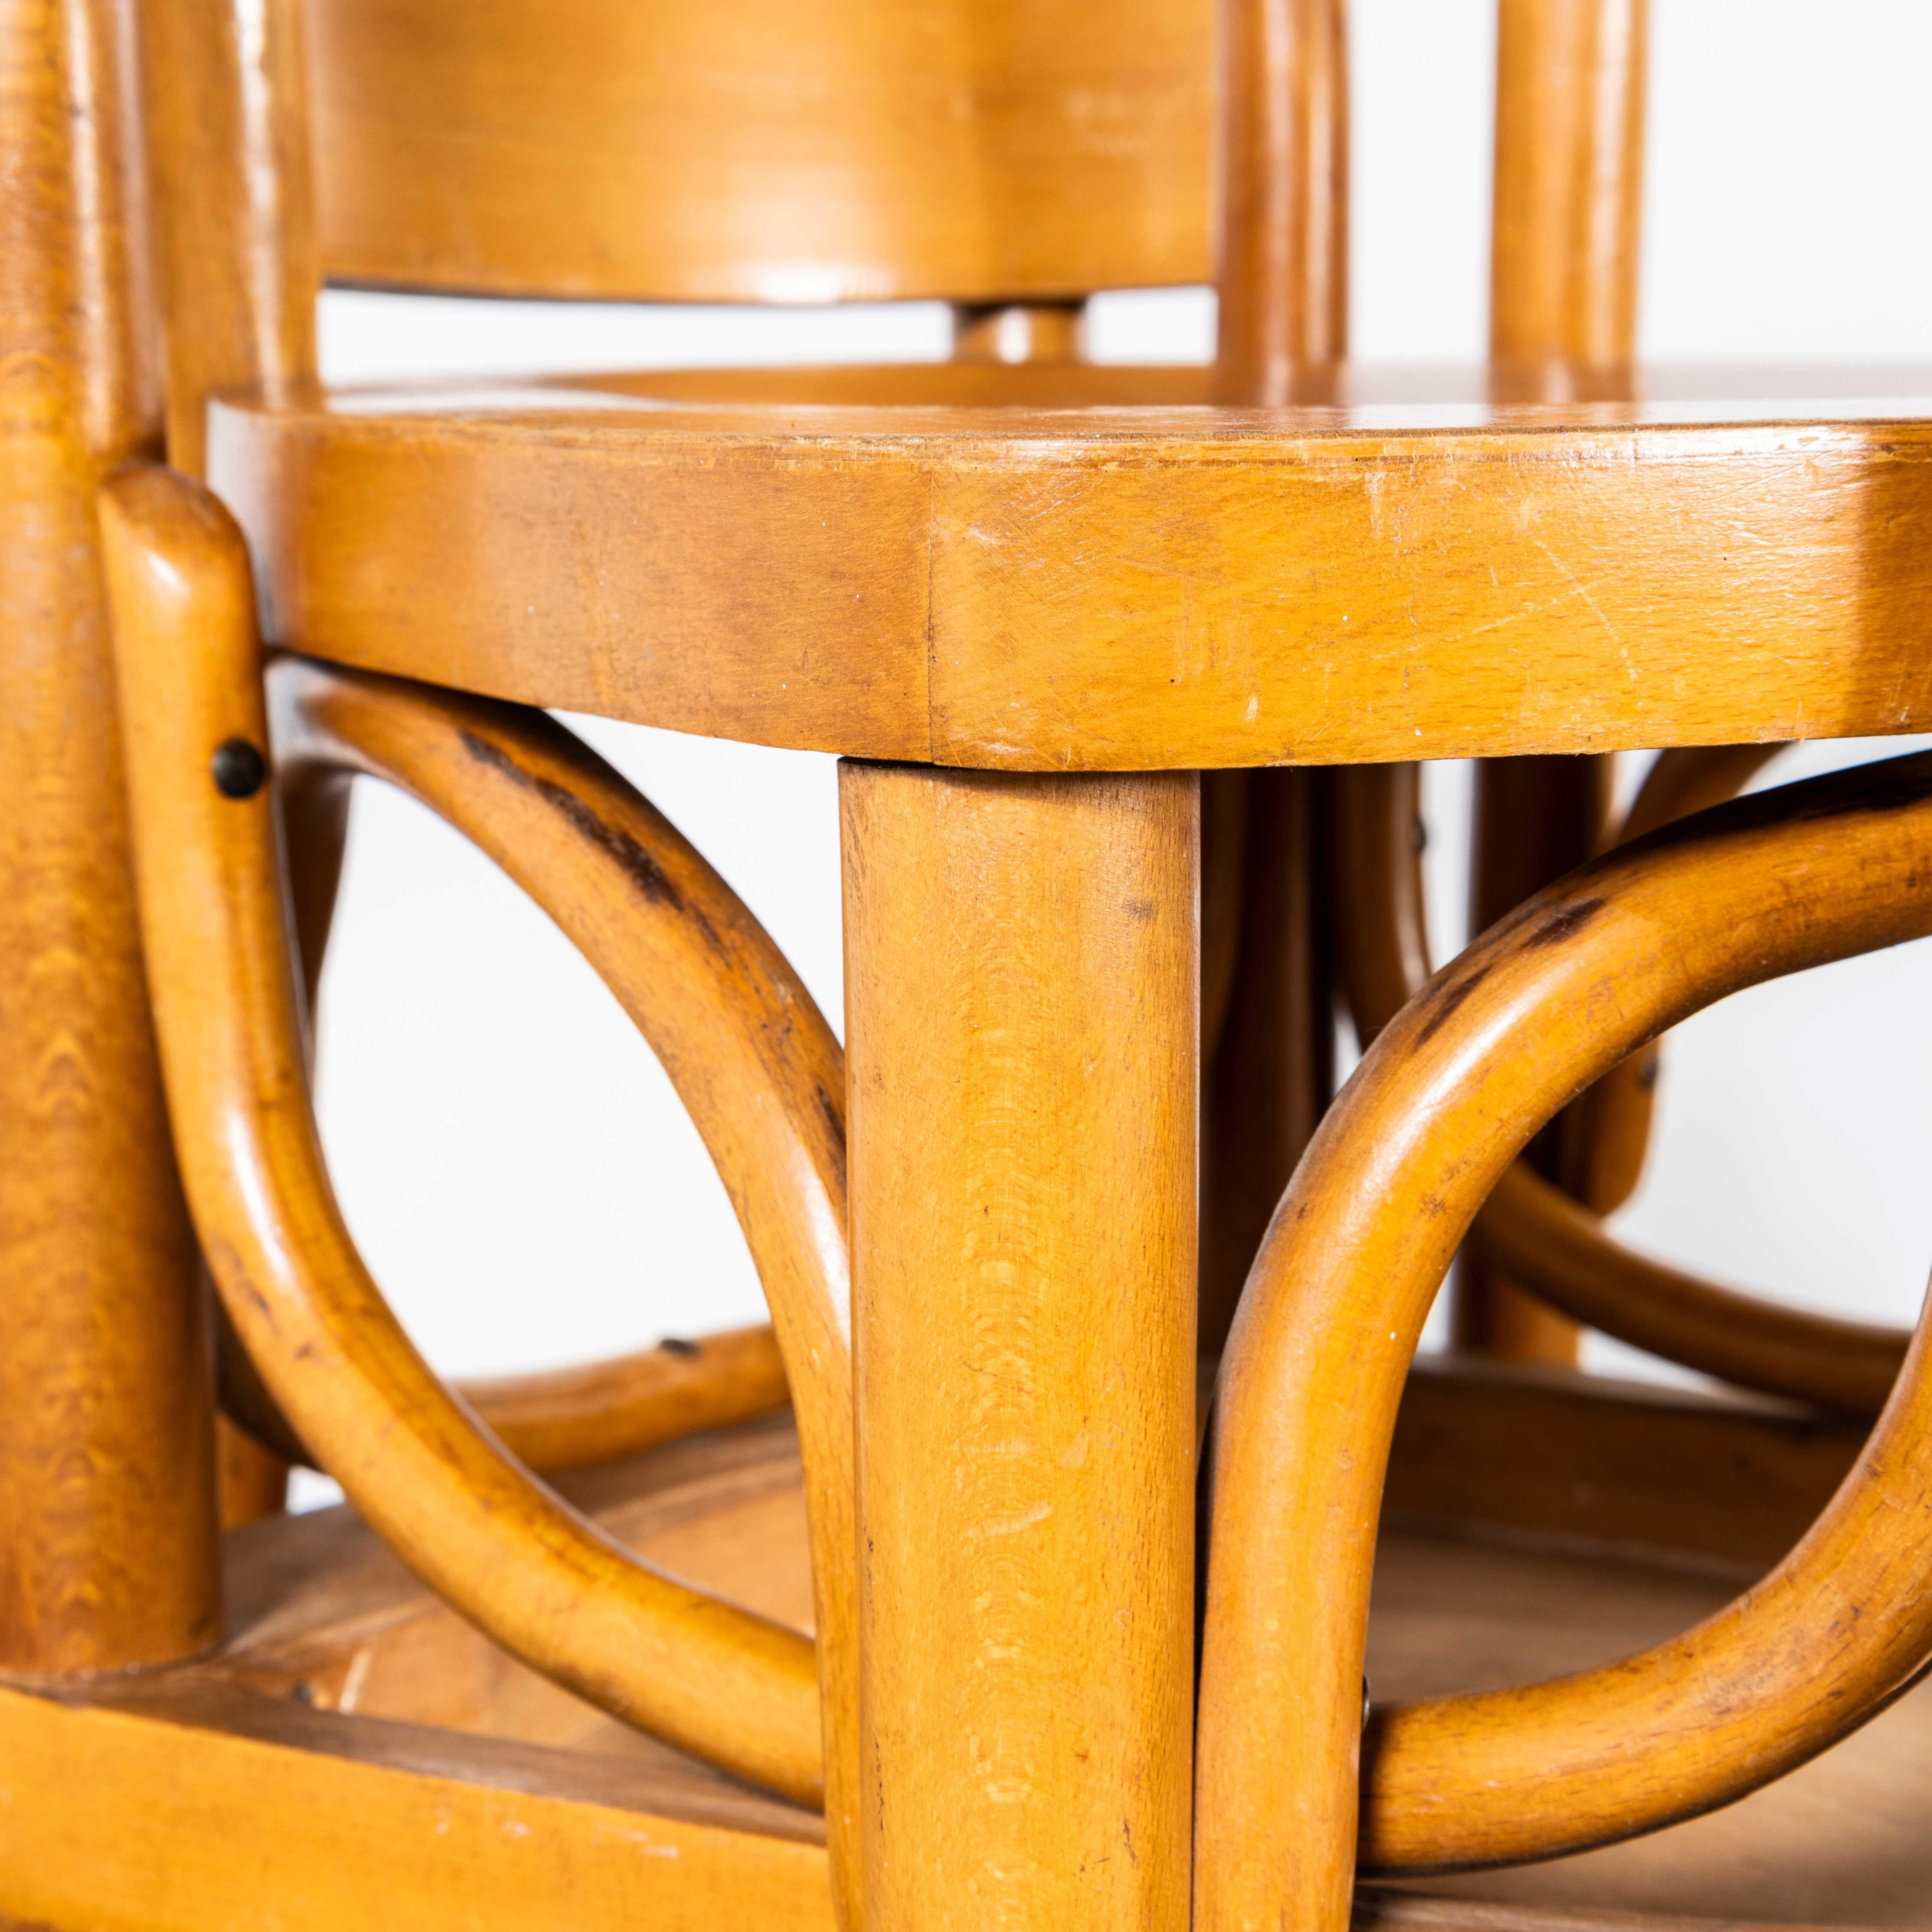 1950’s French Baumann Blonde Edge Back Bentwood Dining Chairs – Set Of Twenty Two
1950’s French Baumann Blonde Edge Back Bentwood Dining Chairs – Set Of Twenty Two. Baumann is a slightly off the radar French producer just starting to gain traction